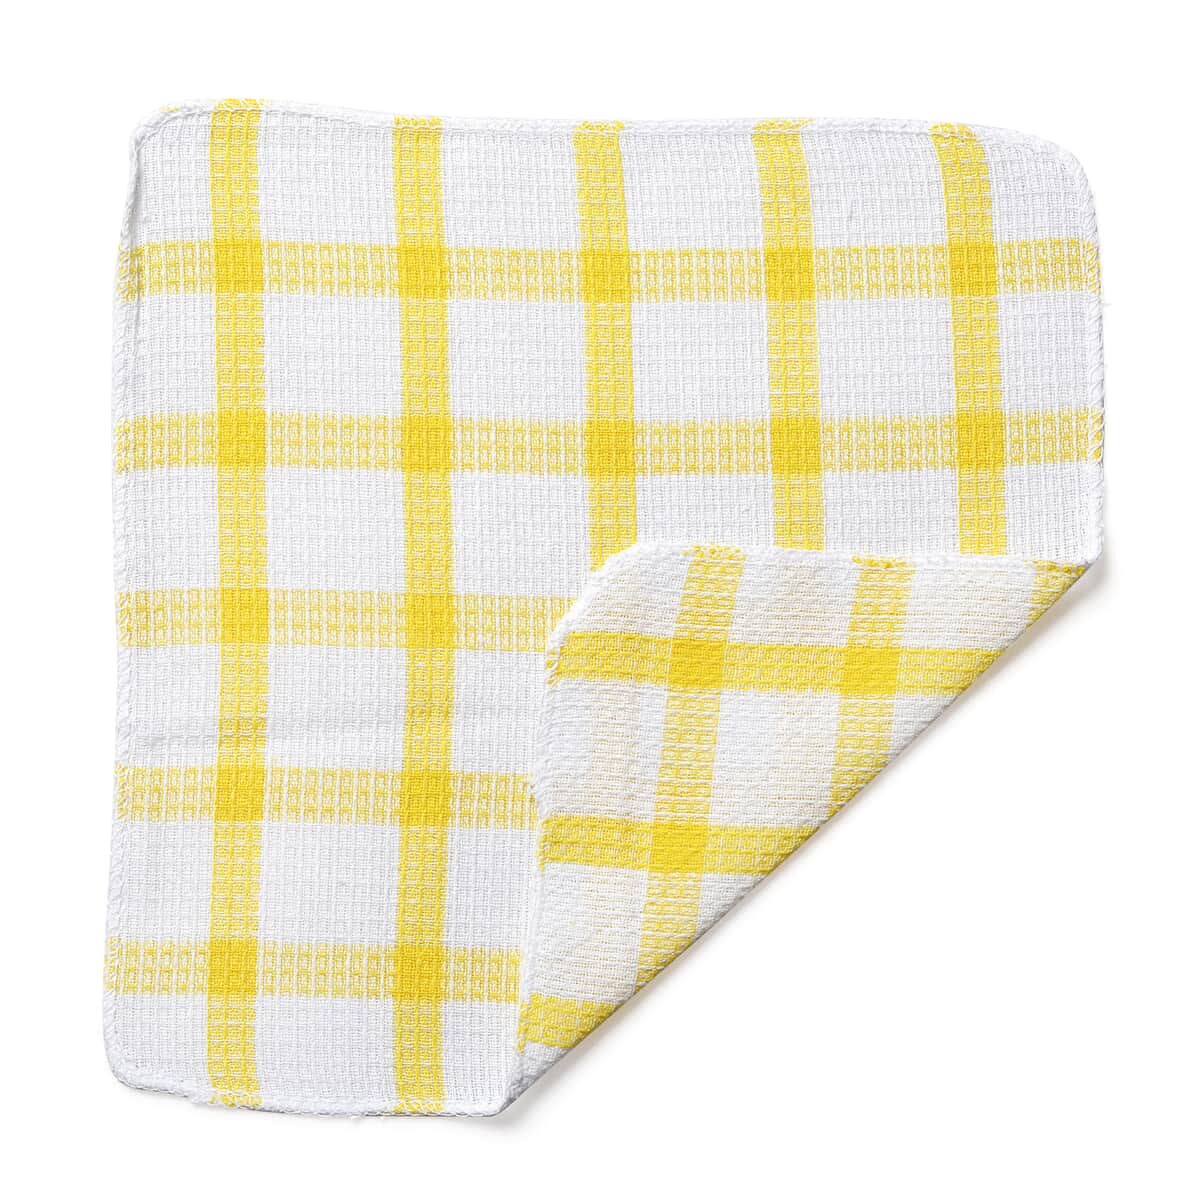 Set of 24 Yellow Cotton Kitchen Towels Dish Cloth Scrubbing Towels Clothes Cleaning Rags Kitchen Essentials image number 6